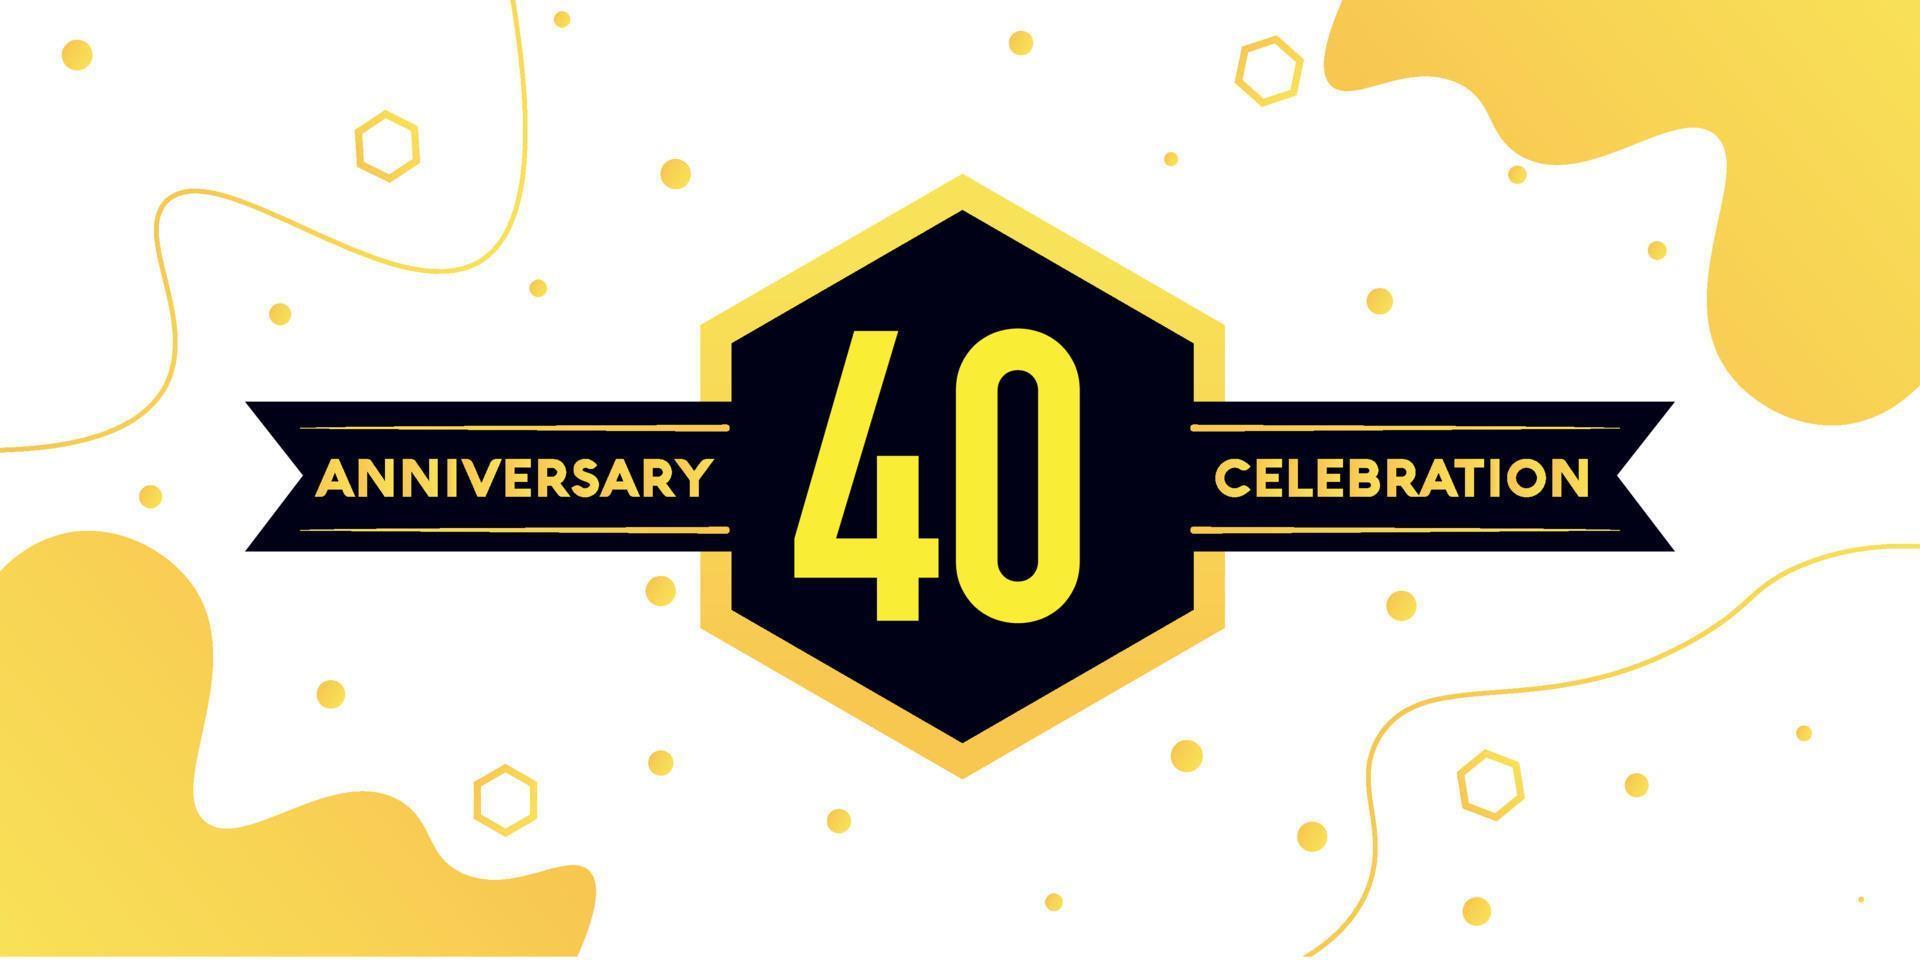 40 years anniversary logo vector design with yellow geometric shape with black and abstract design on white background template